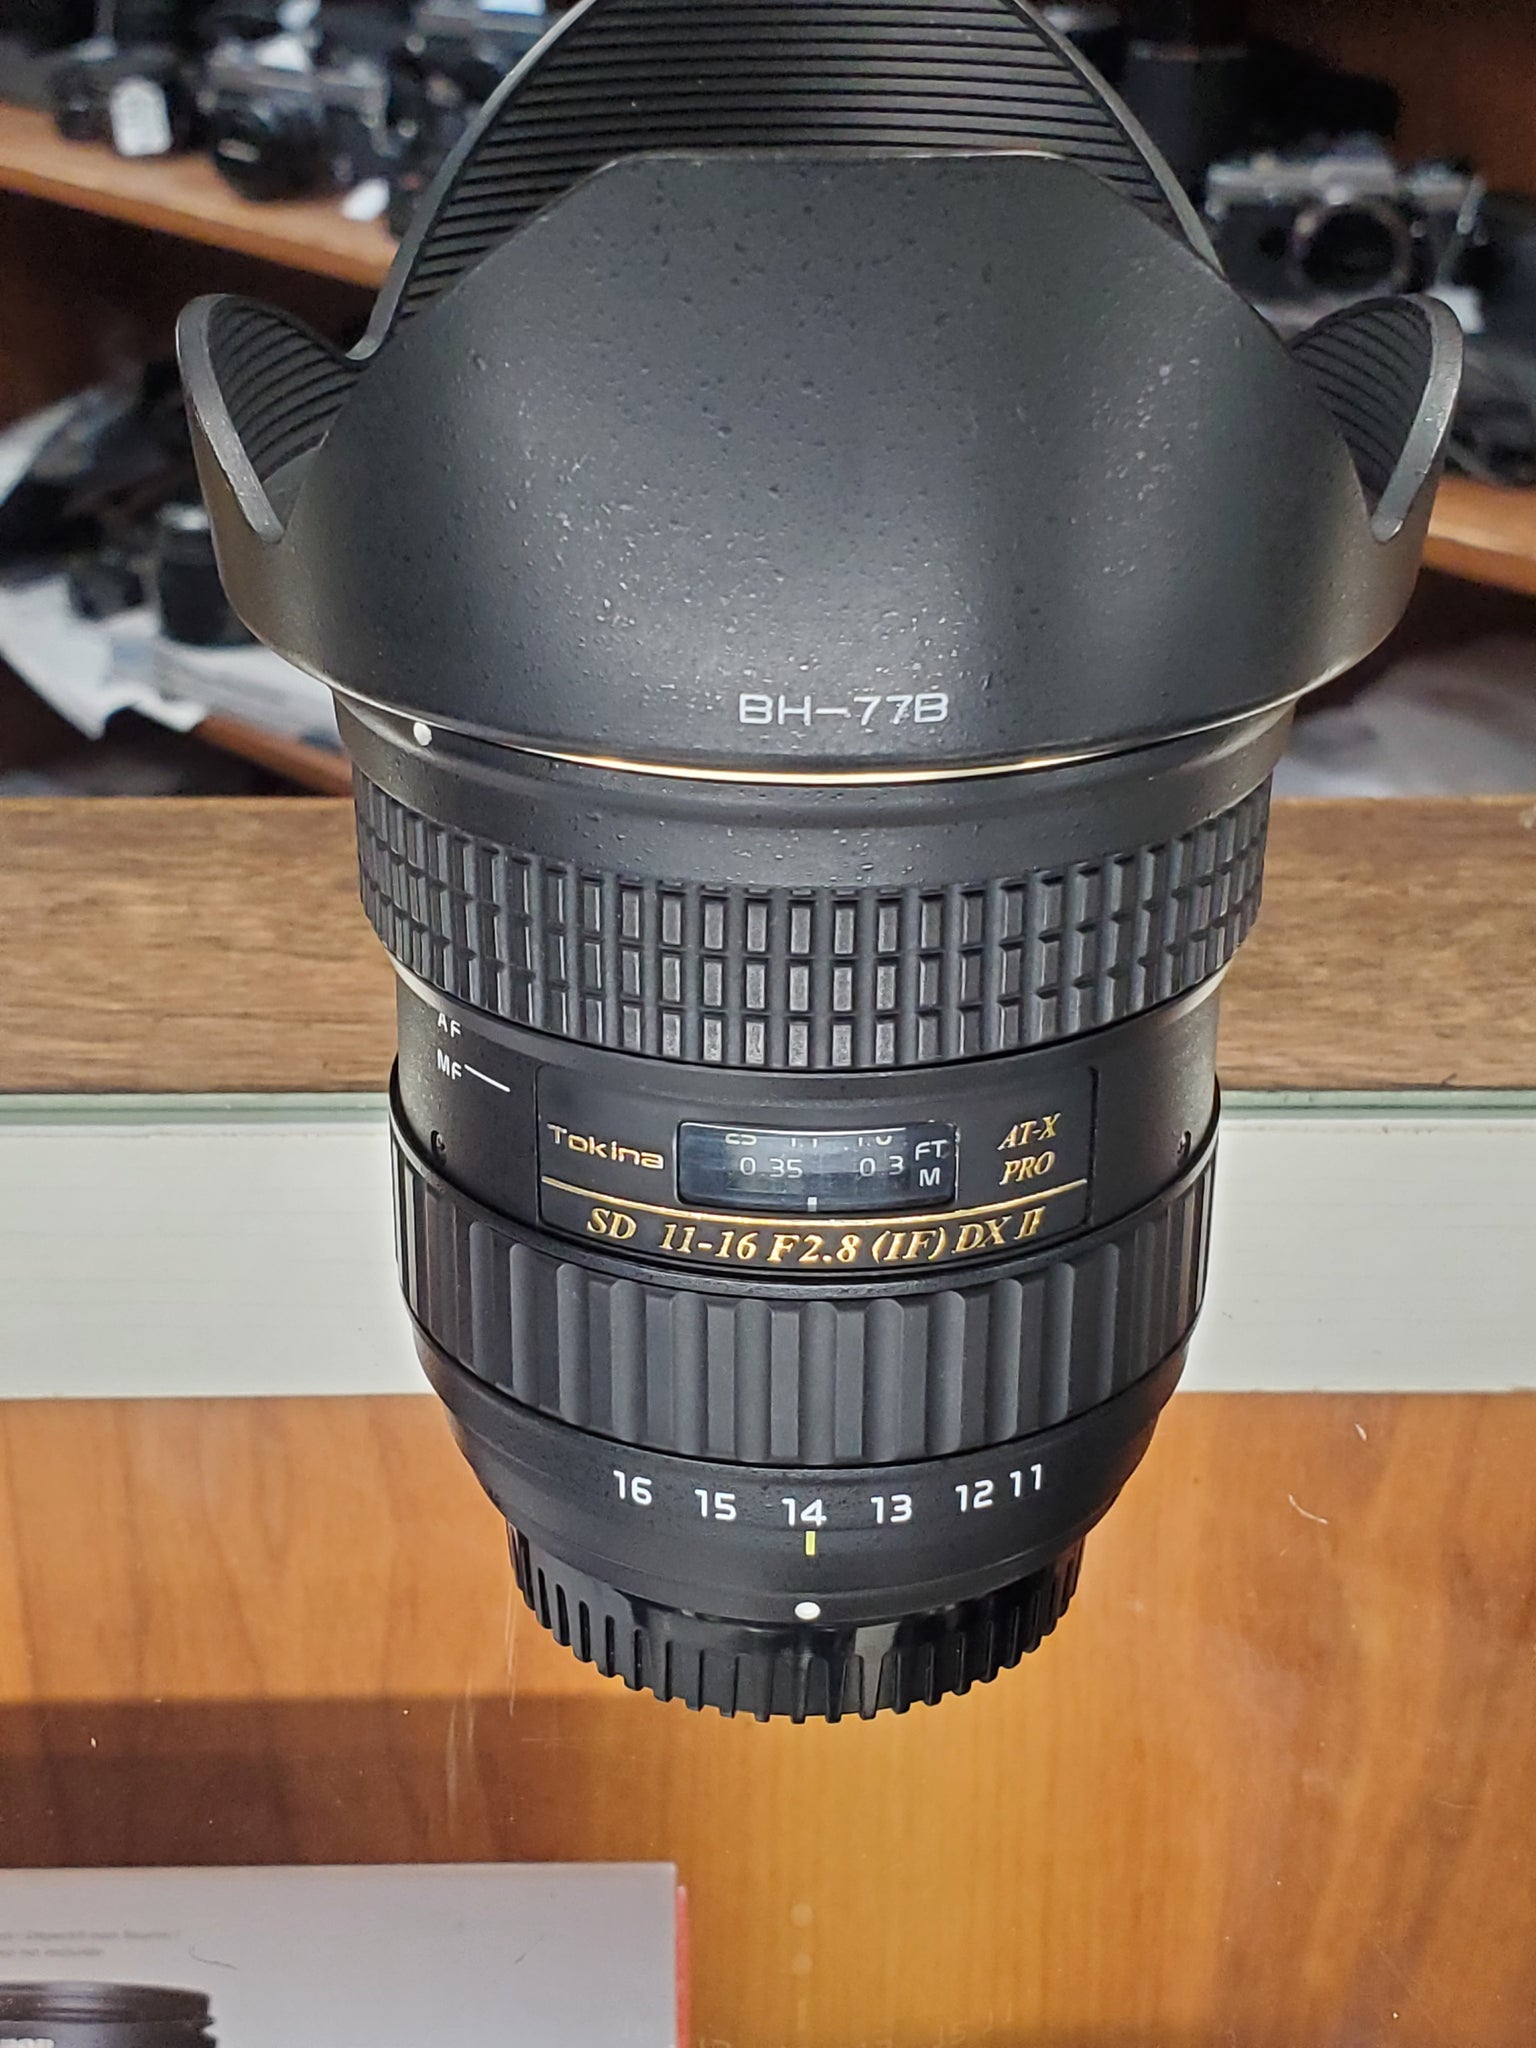 Tokina 11-16mm f/2.8 AT-X Pro DX Wide Angle Lens for Nikon - 9.5